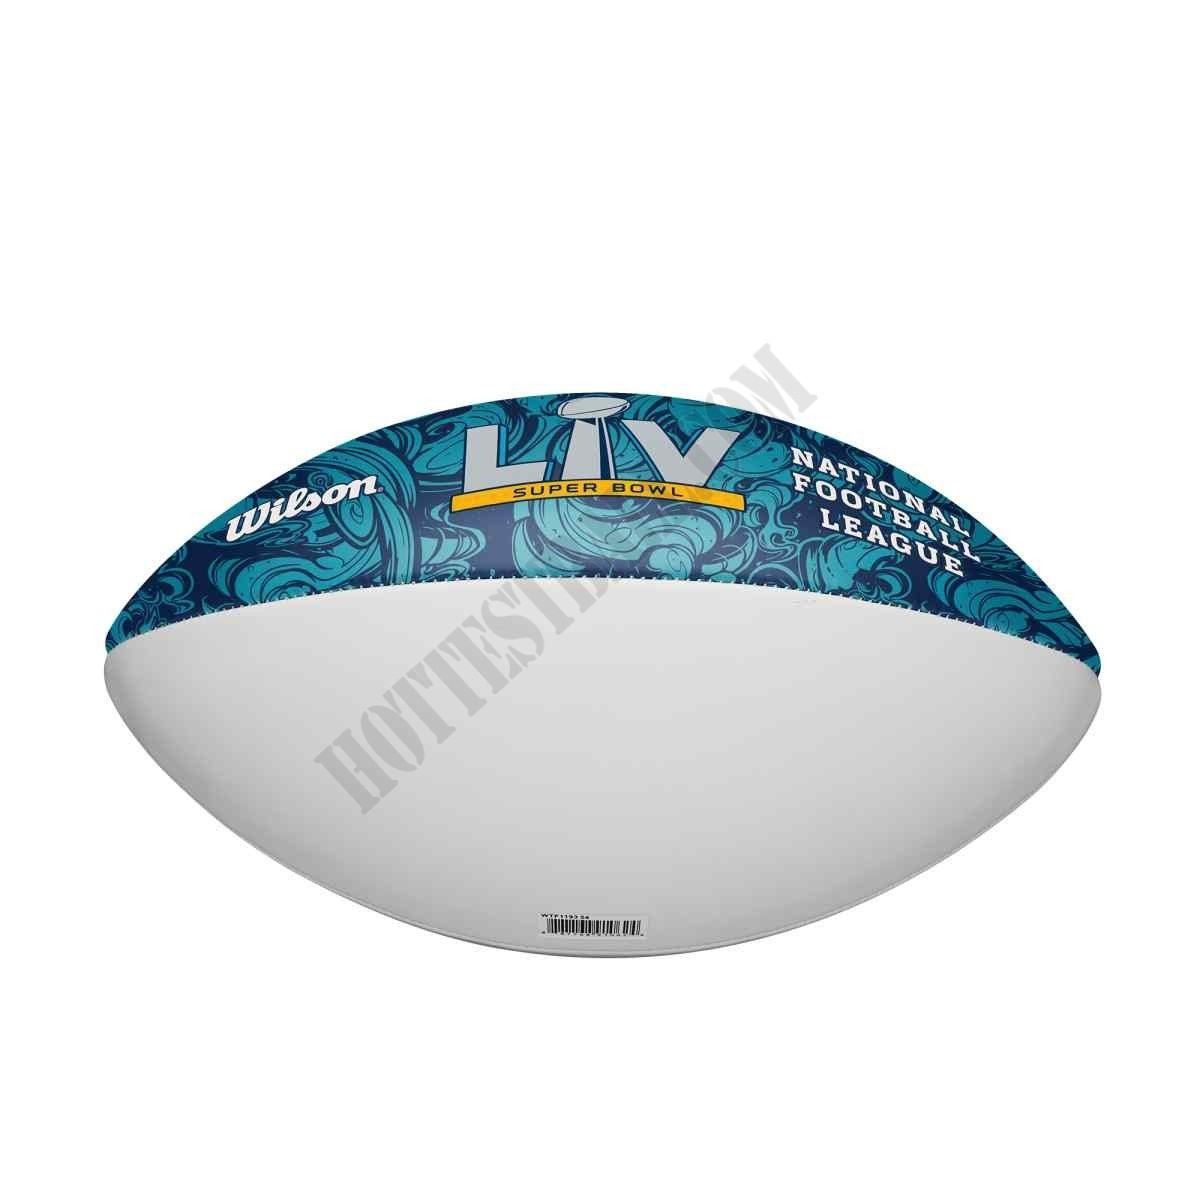 Super Bowl LV Official Autograph Football ● Wilson Promotions - -2